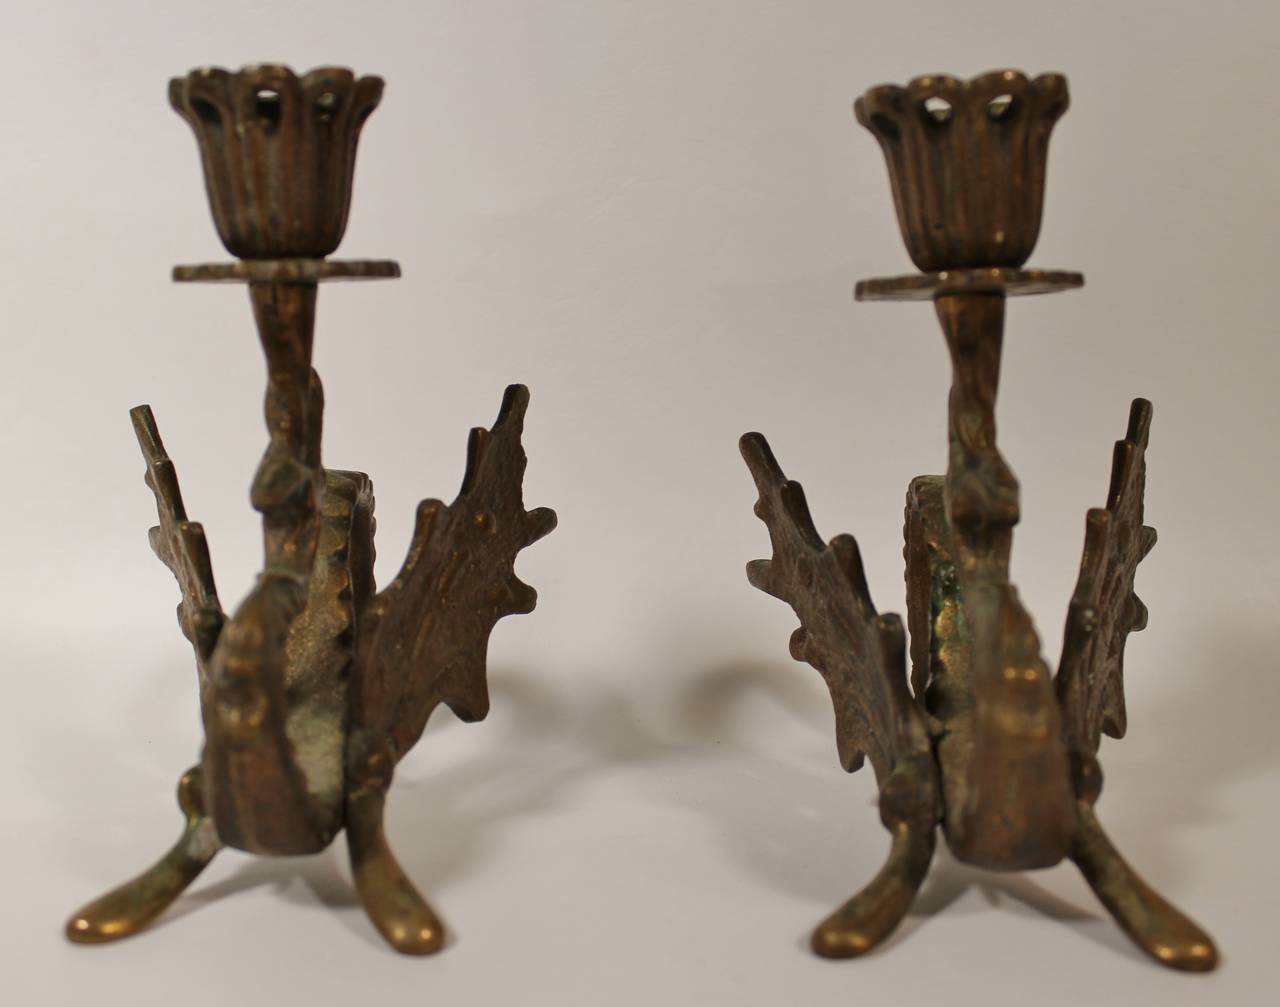 Art Deco Bronze Dragon Candle Holders

Free shipping within the United States and Canada.